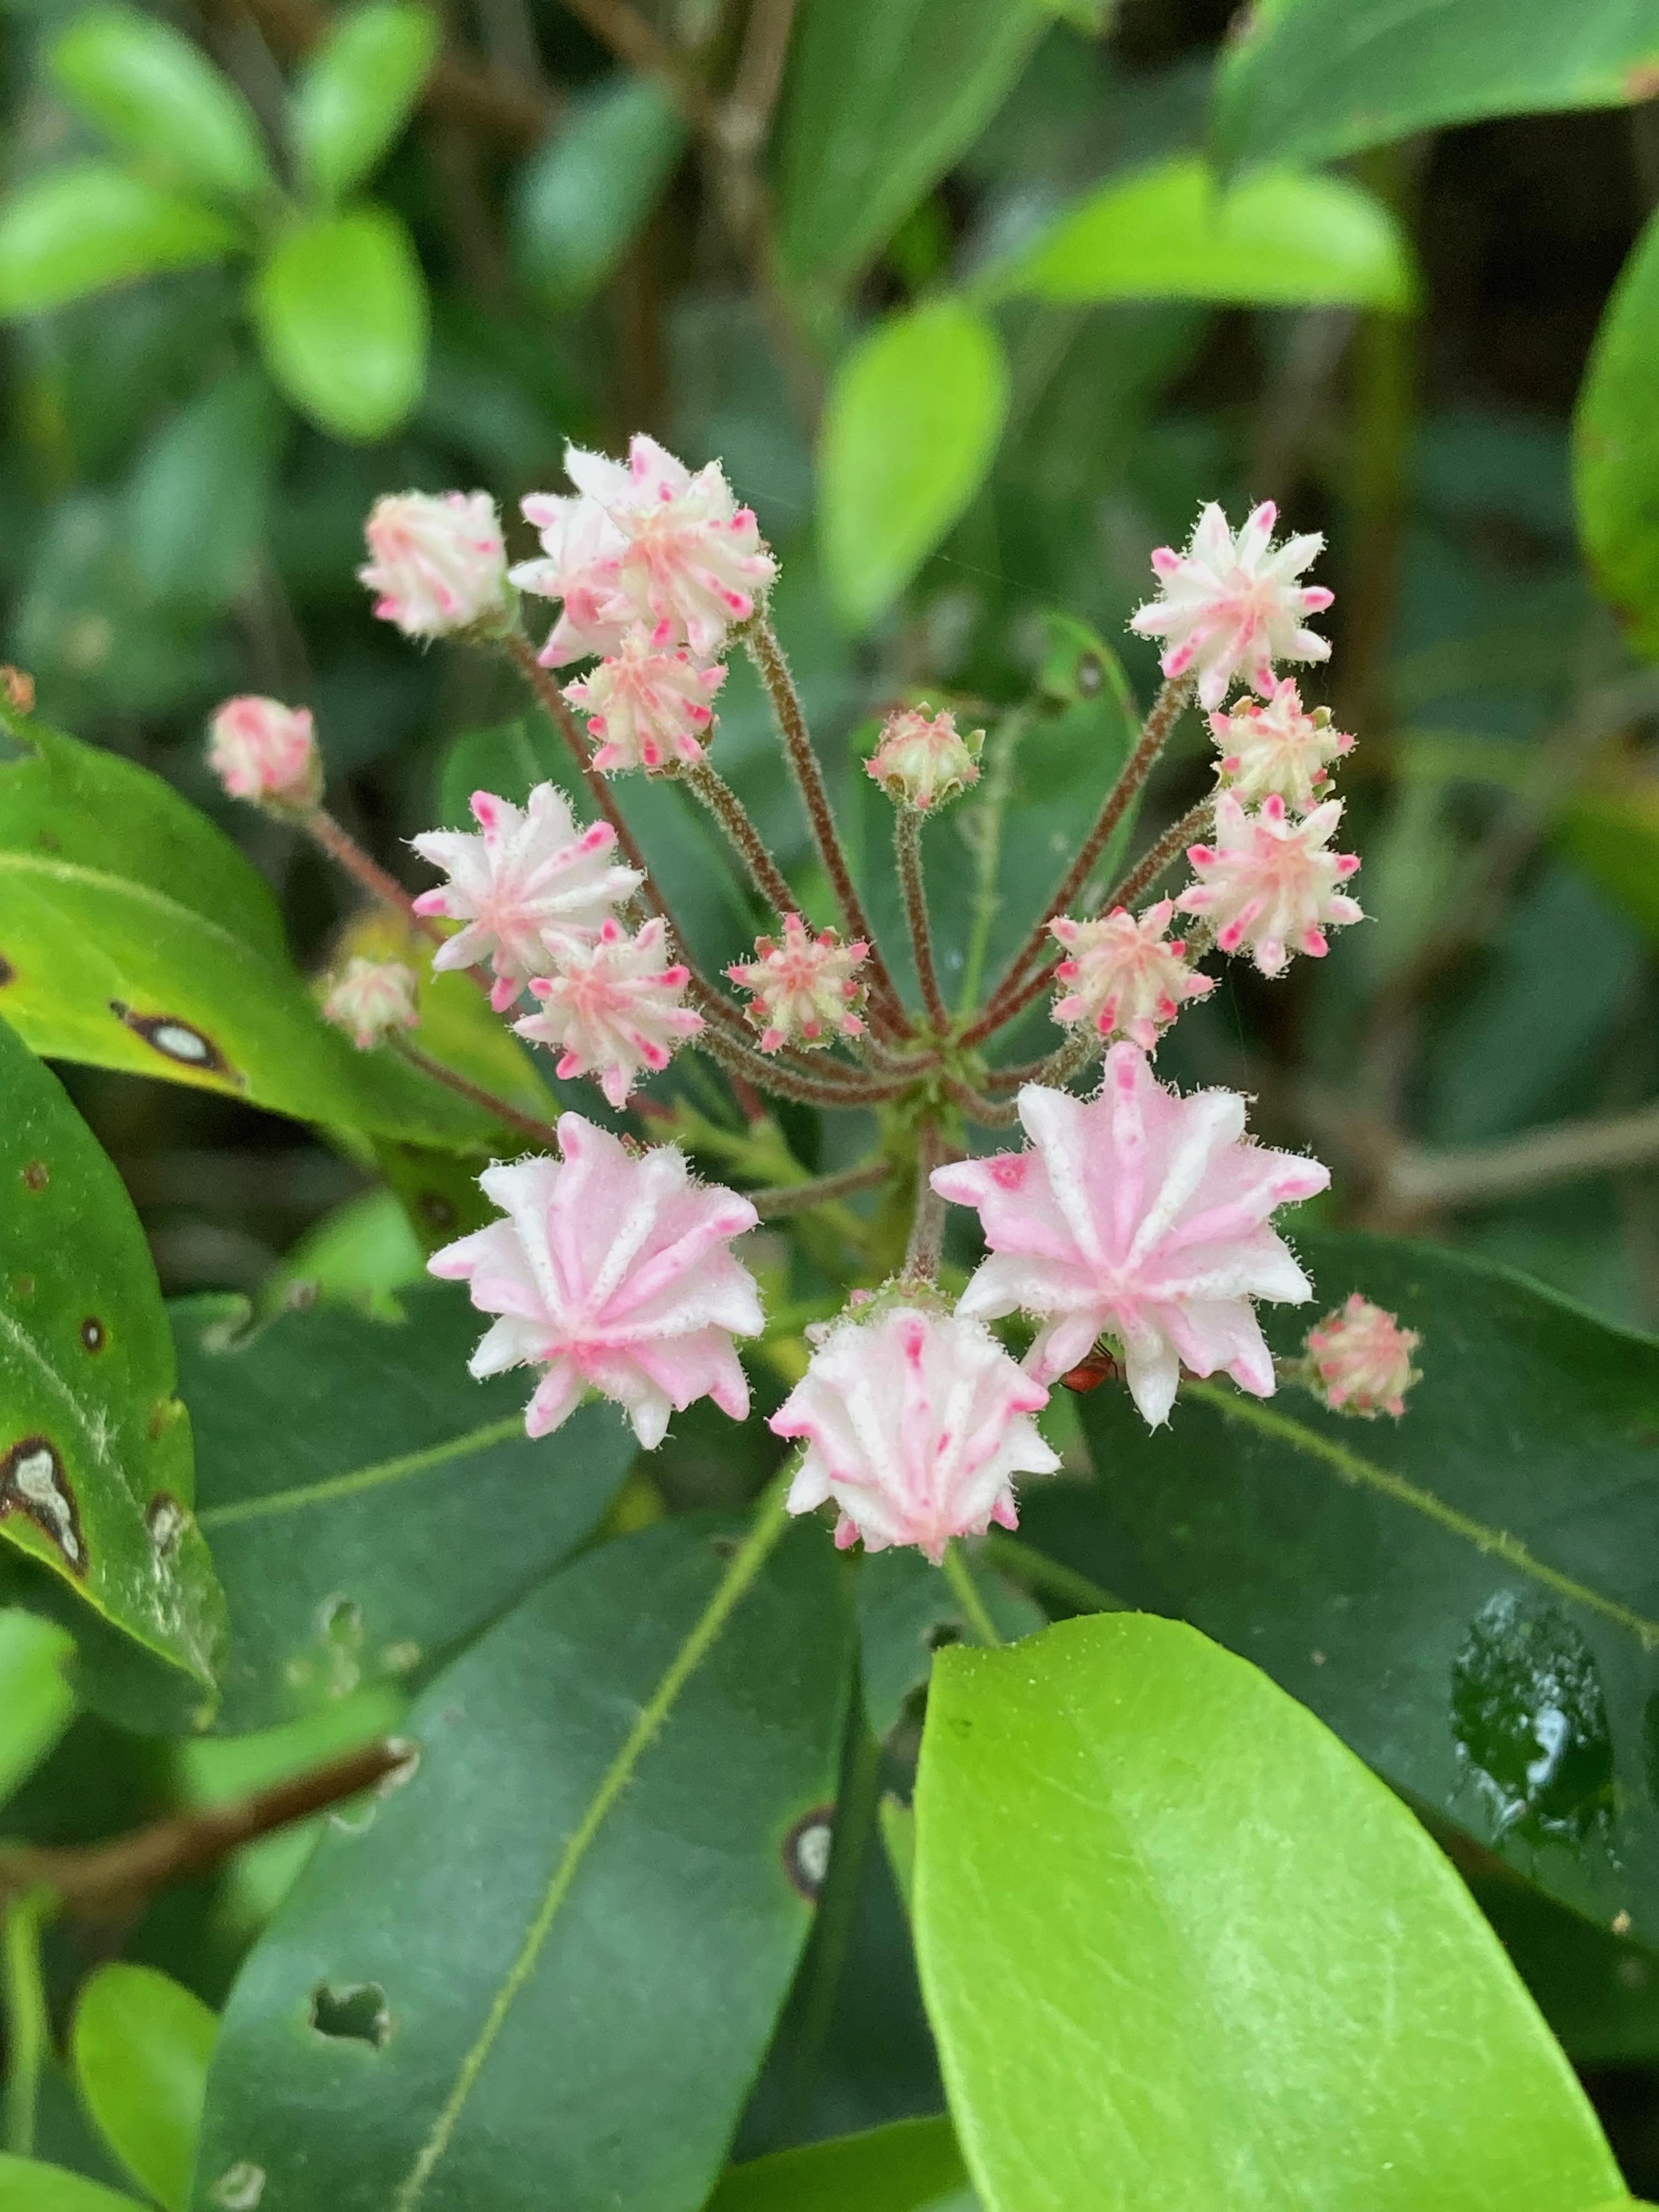 The Scientific Name is Kalmia latifolia. You will likely hear them called Mountain Laurel, Ivy, Calico-bush. This picture shows the Even the flower buds about to open are unusual and very attractive. of Kalmia latifolia